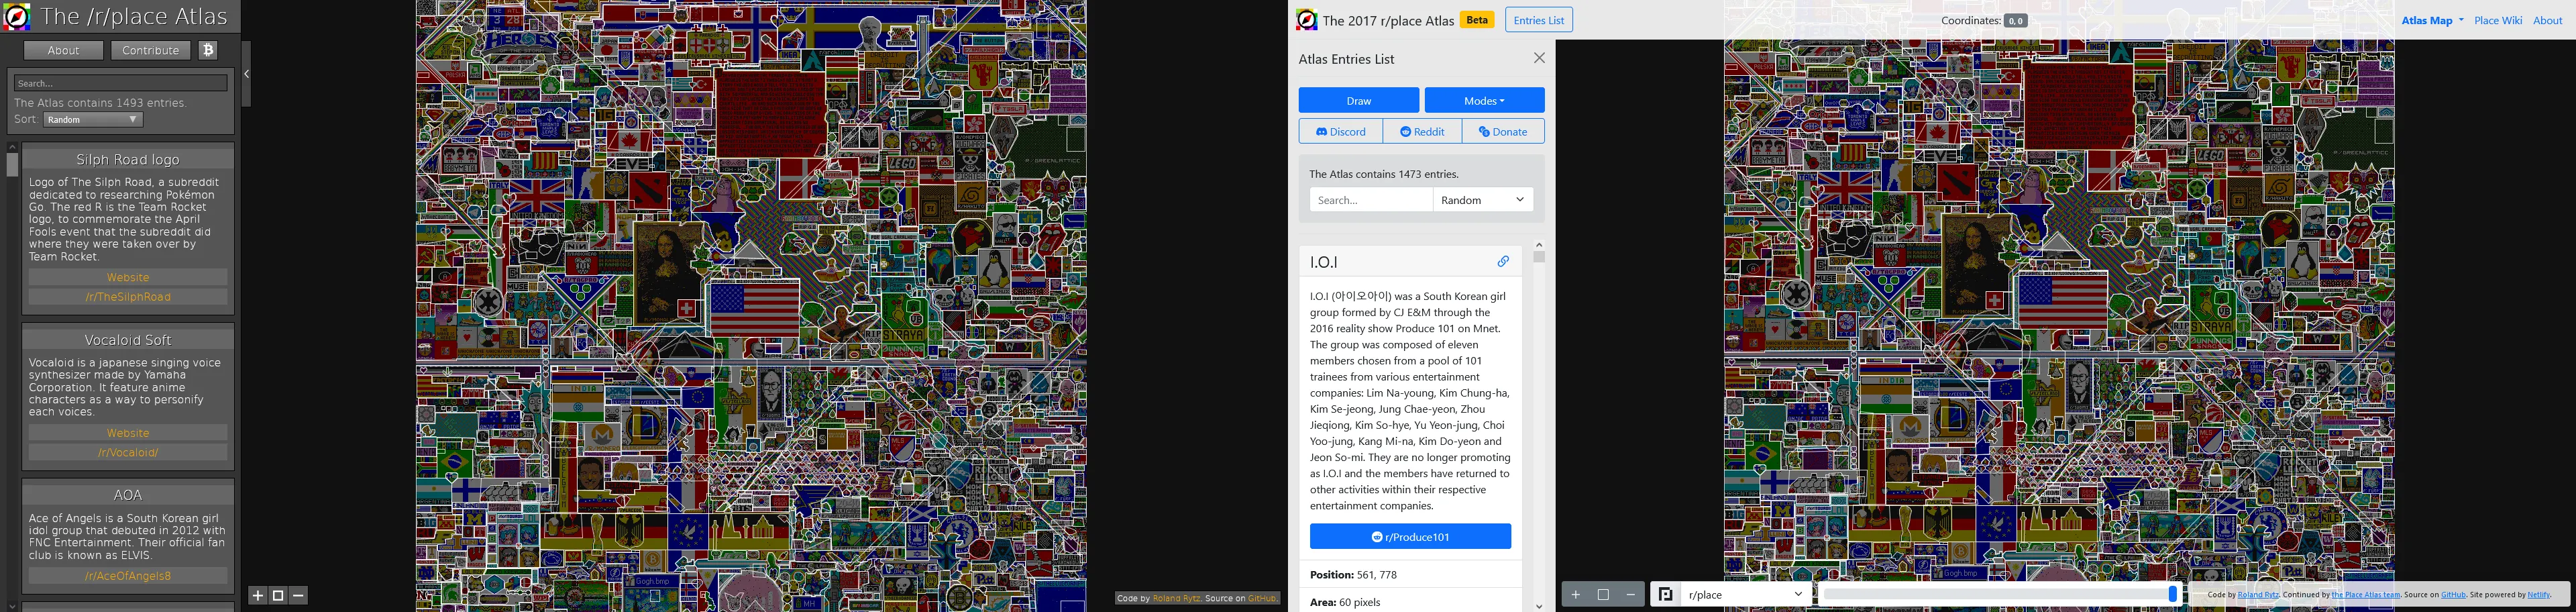 A side-to-side comparison between the old interface (left) and the new interface (right) of The 2017 r/place Atlas.